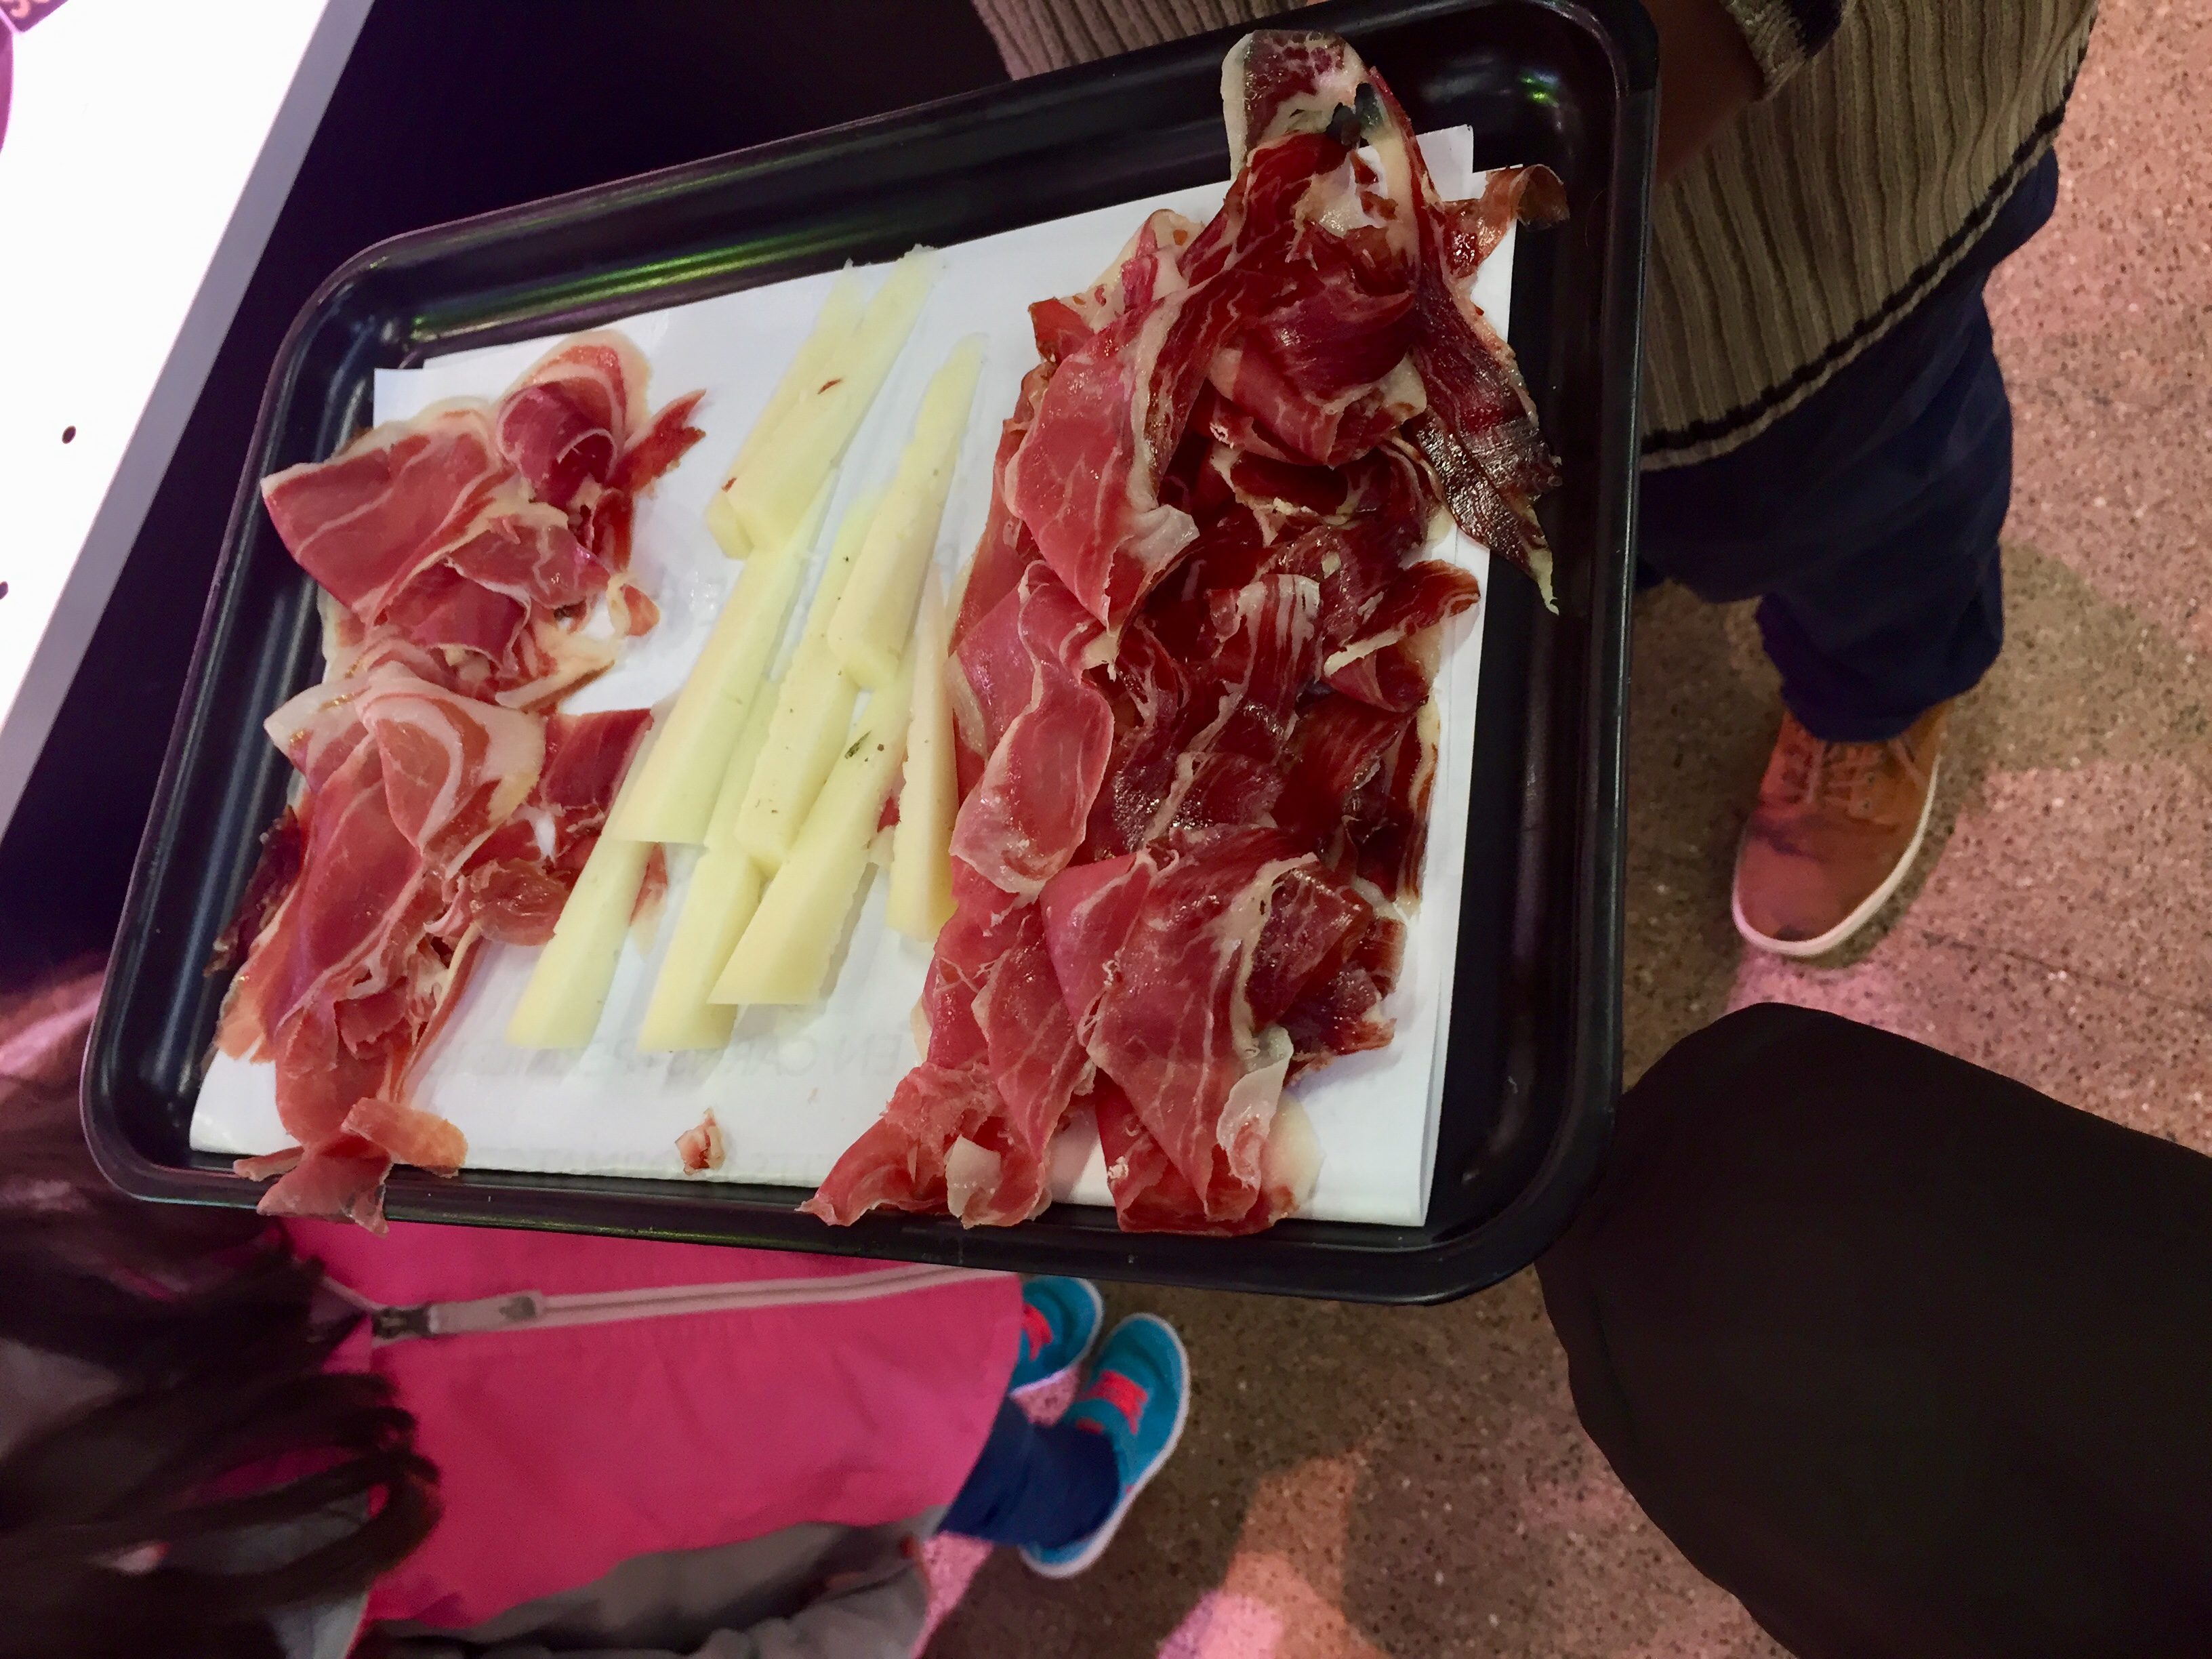 Spanish ham is one of Spain's simple delights!